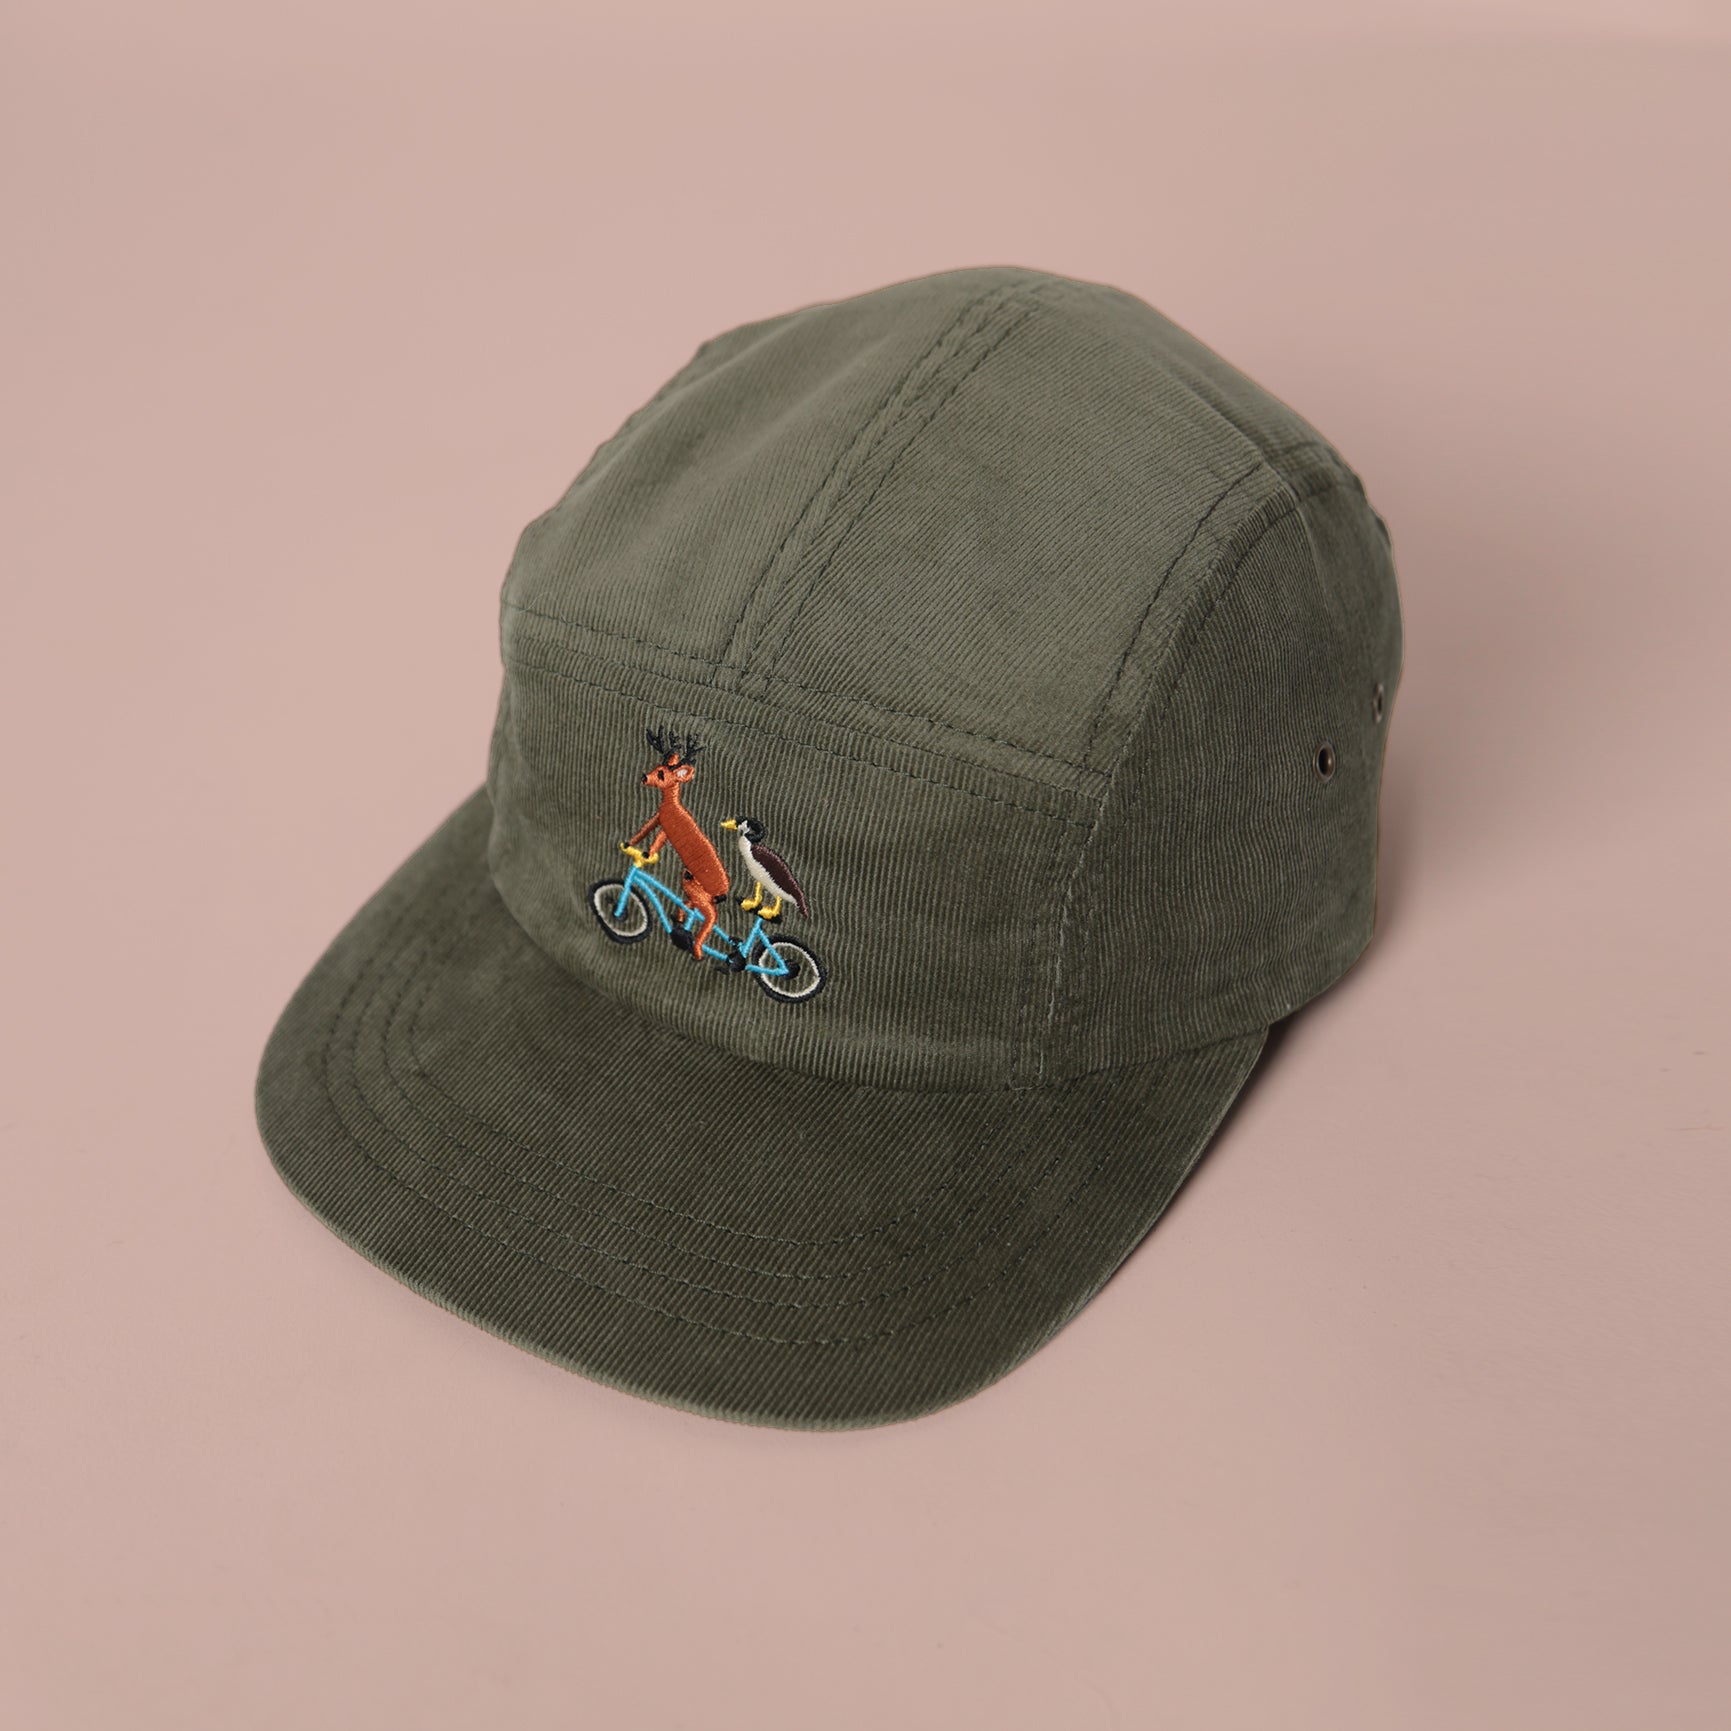 5 Panel - Olive Cord - Pedal Pals Embroidery